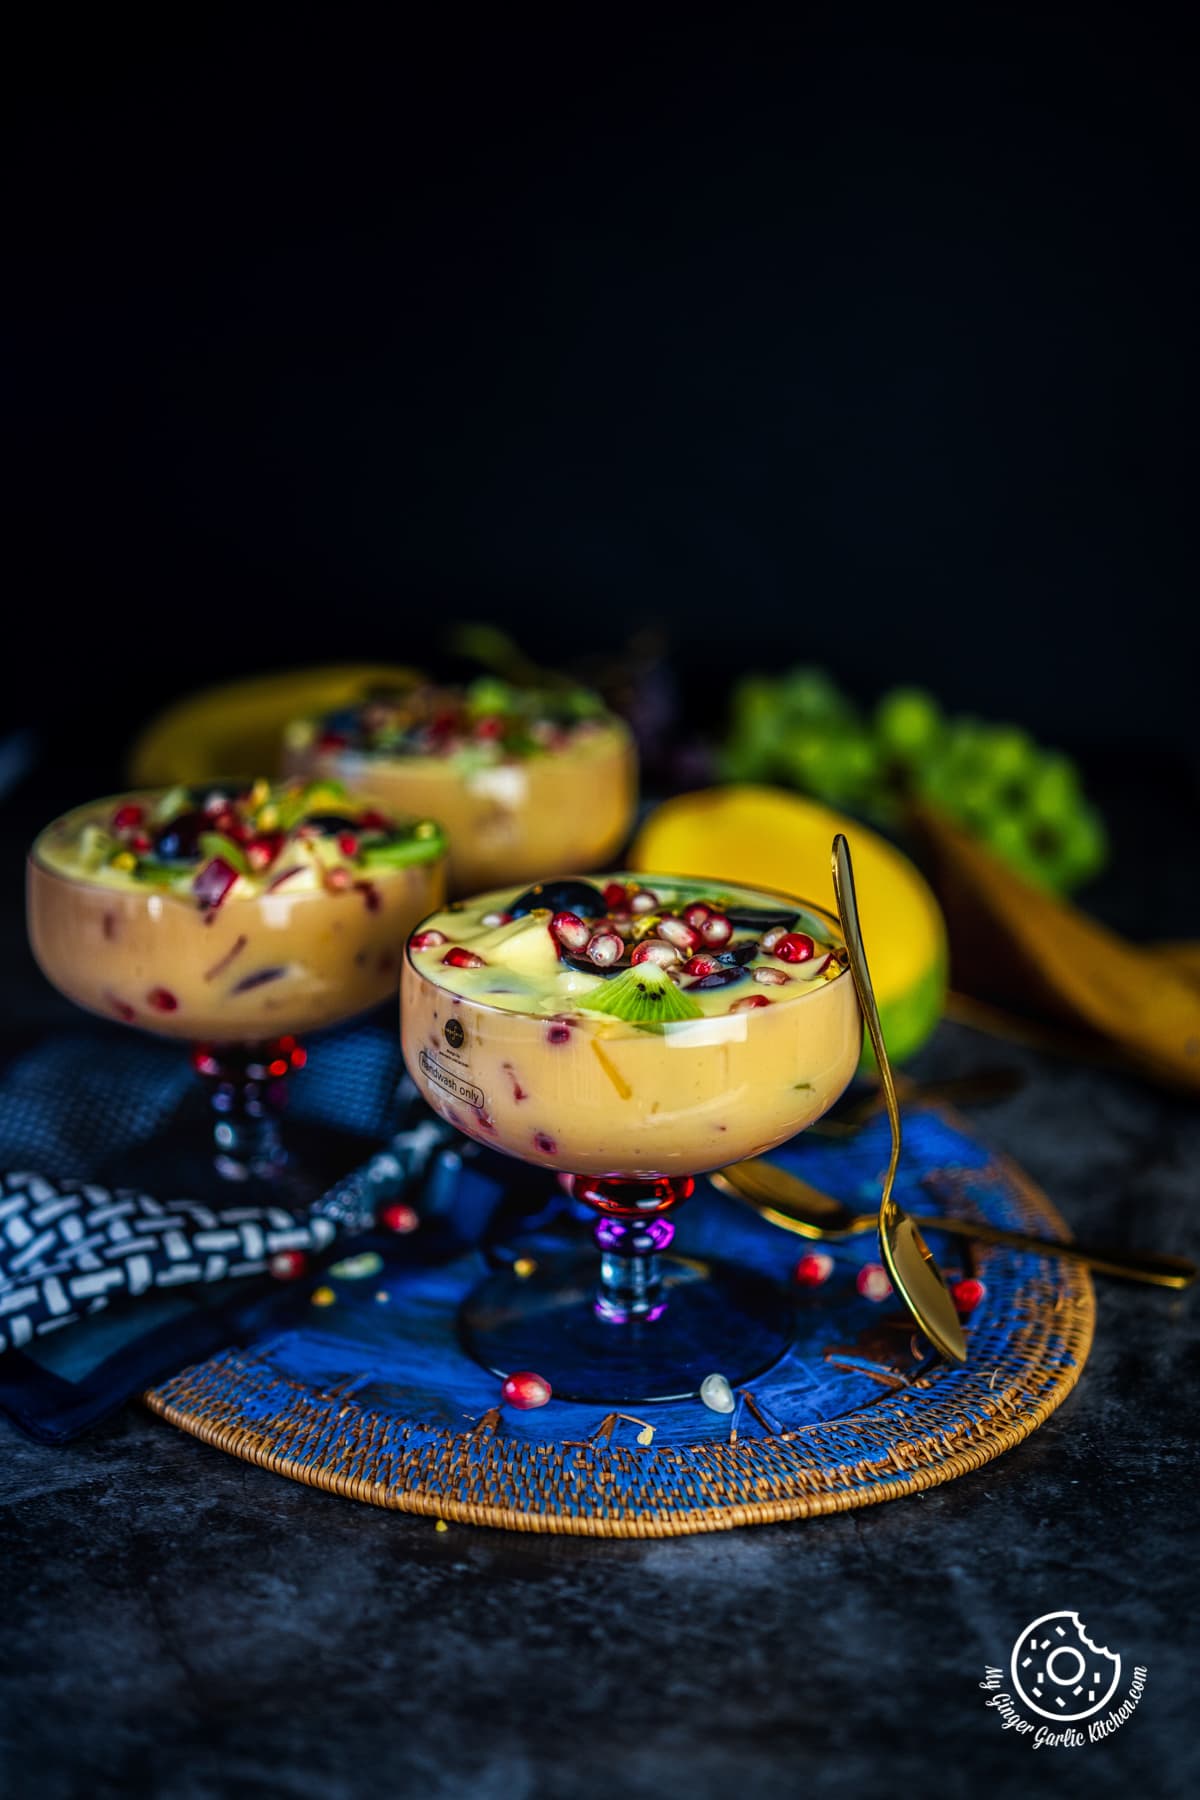 shot of fruit custard in a purple transparent bowl along with a golden spoon and two bowls in the background